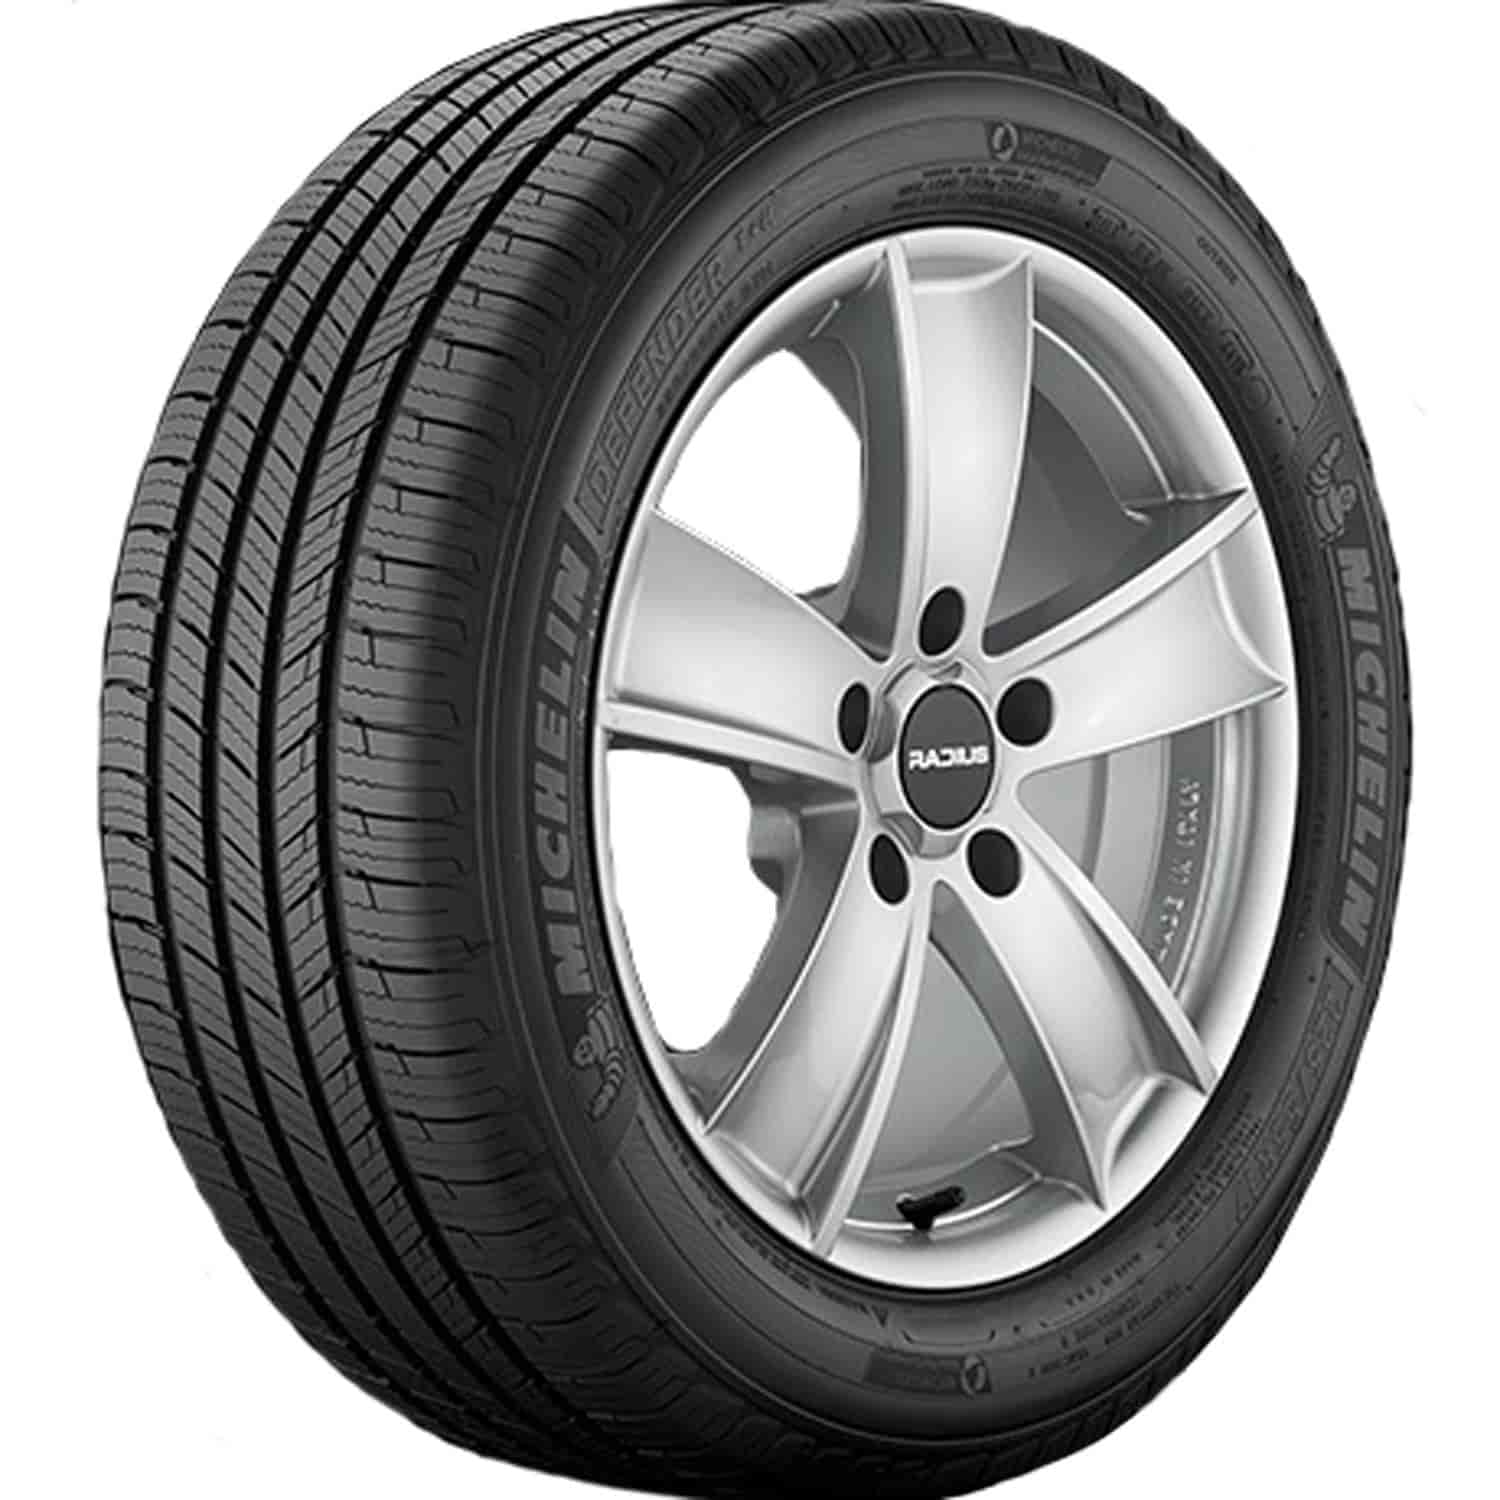 Defender T+H Tire Size:215/65R17